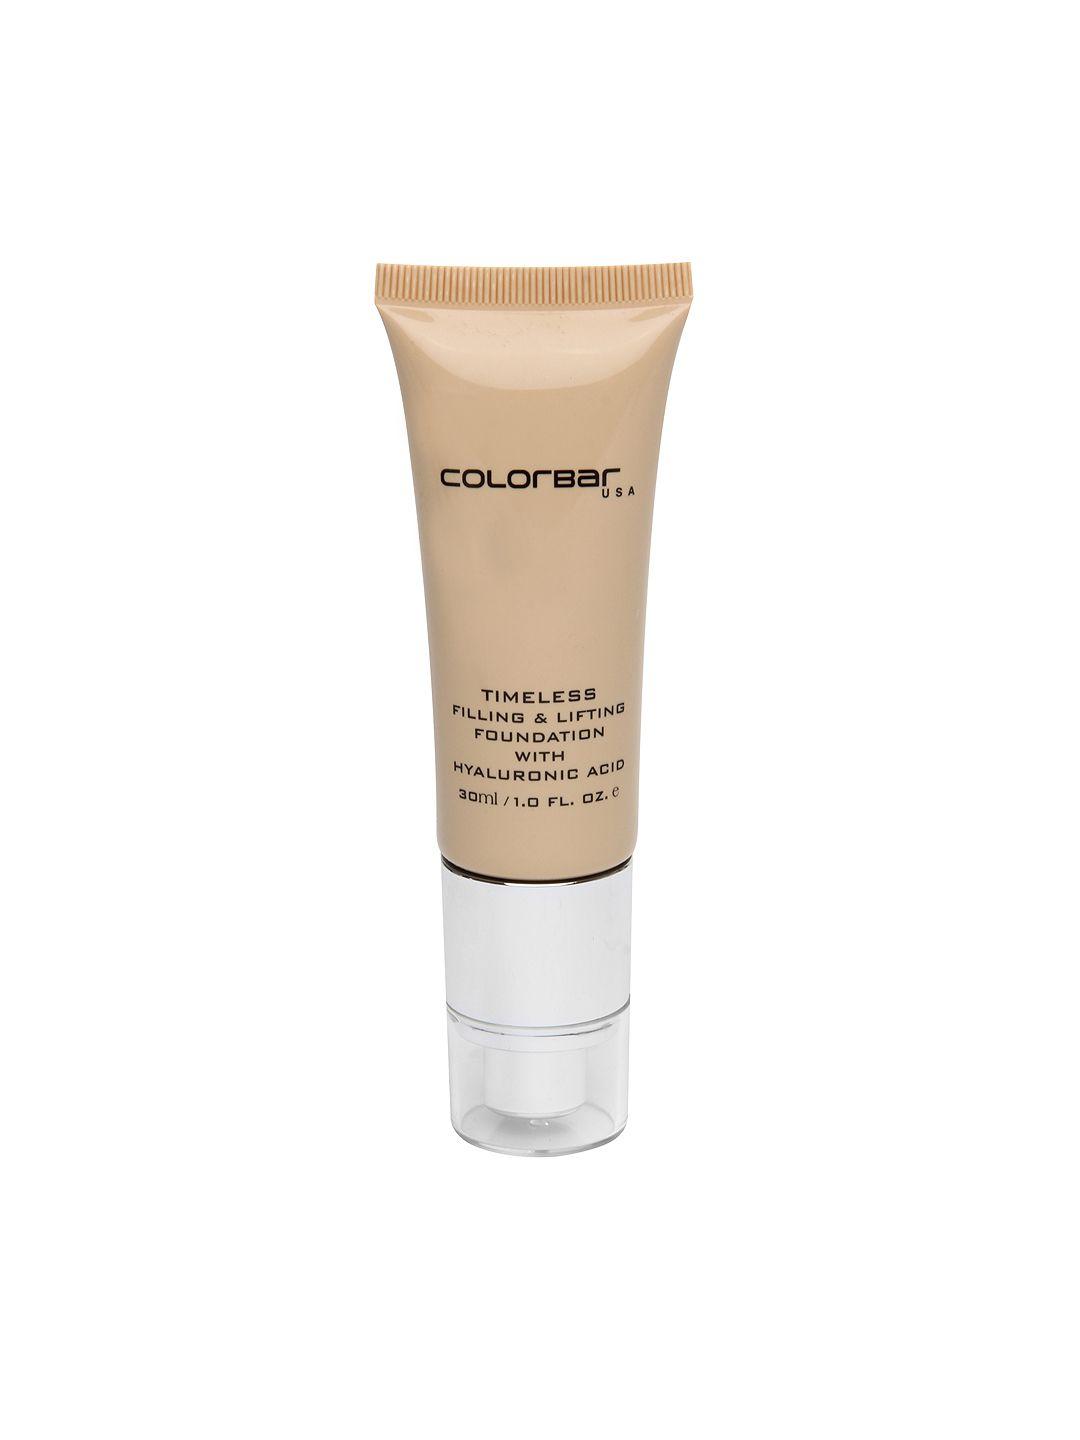 colorbar sweet shell timless filling & lifting foundation - 03 30 ml